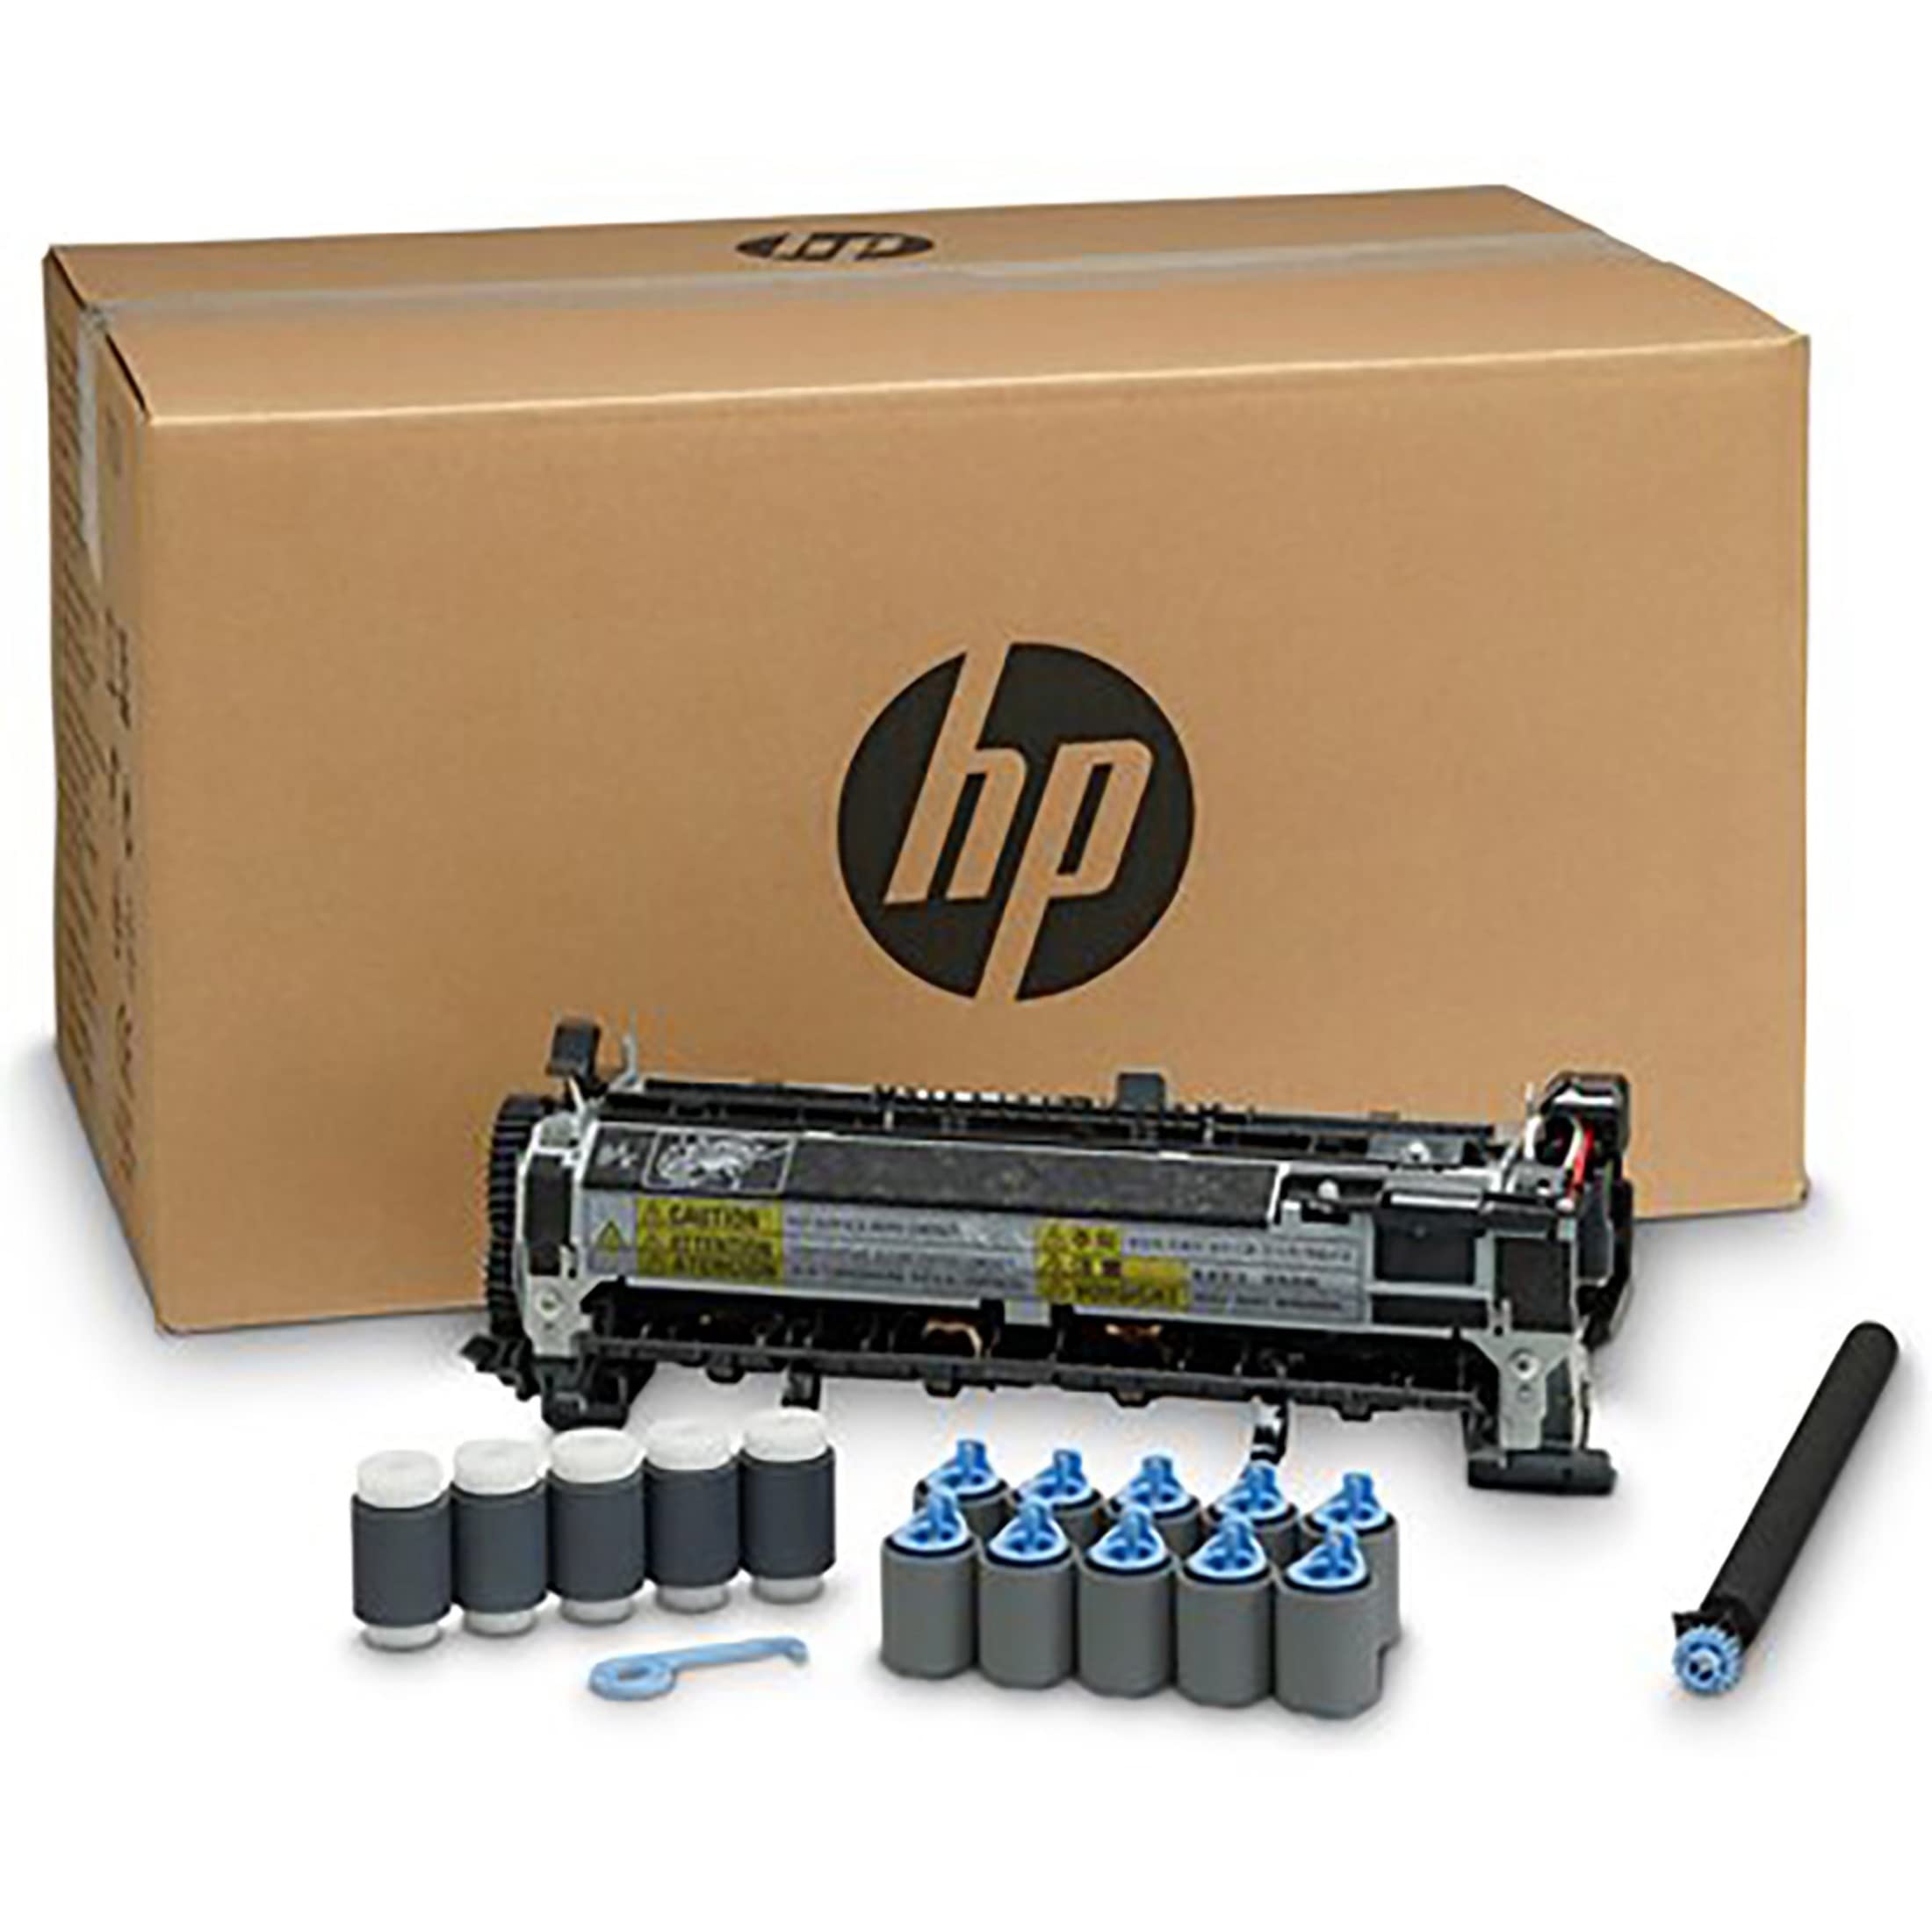 HP 、HEWF2G76A、Laserjet 110V メンテナンス キット、F2G76A、各 1